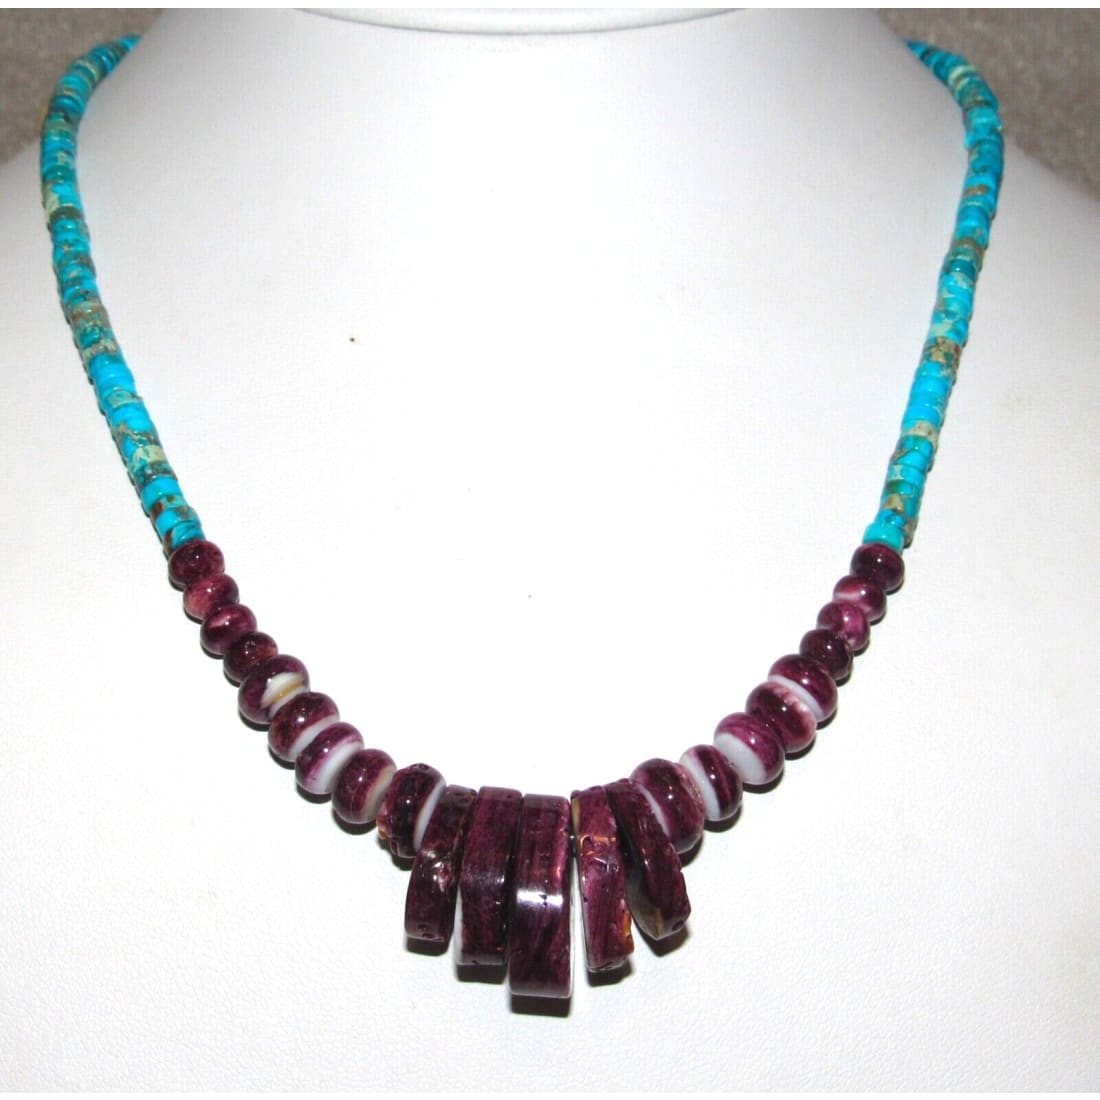 Navajo Purple Spiny Oyster Kingman Turquoise Heishi Necklace